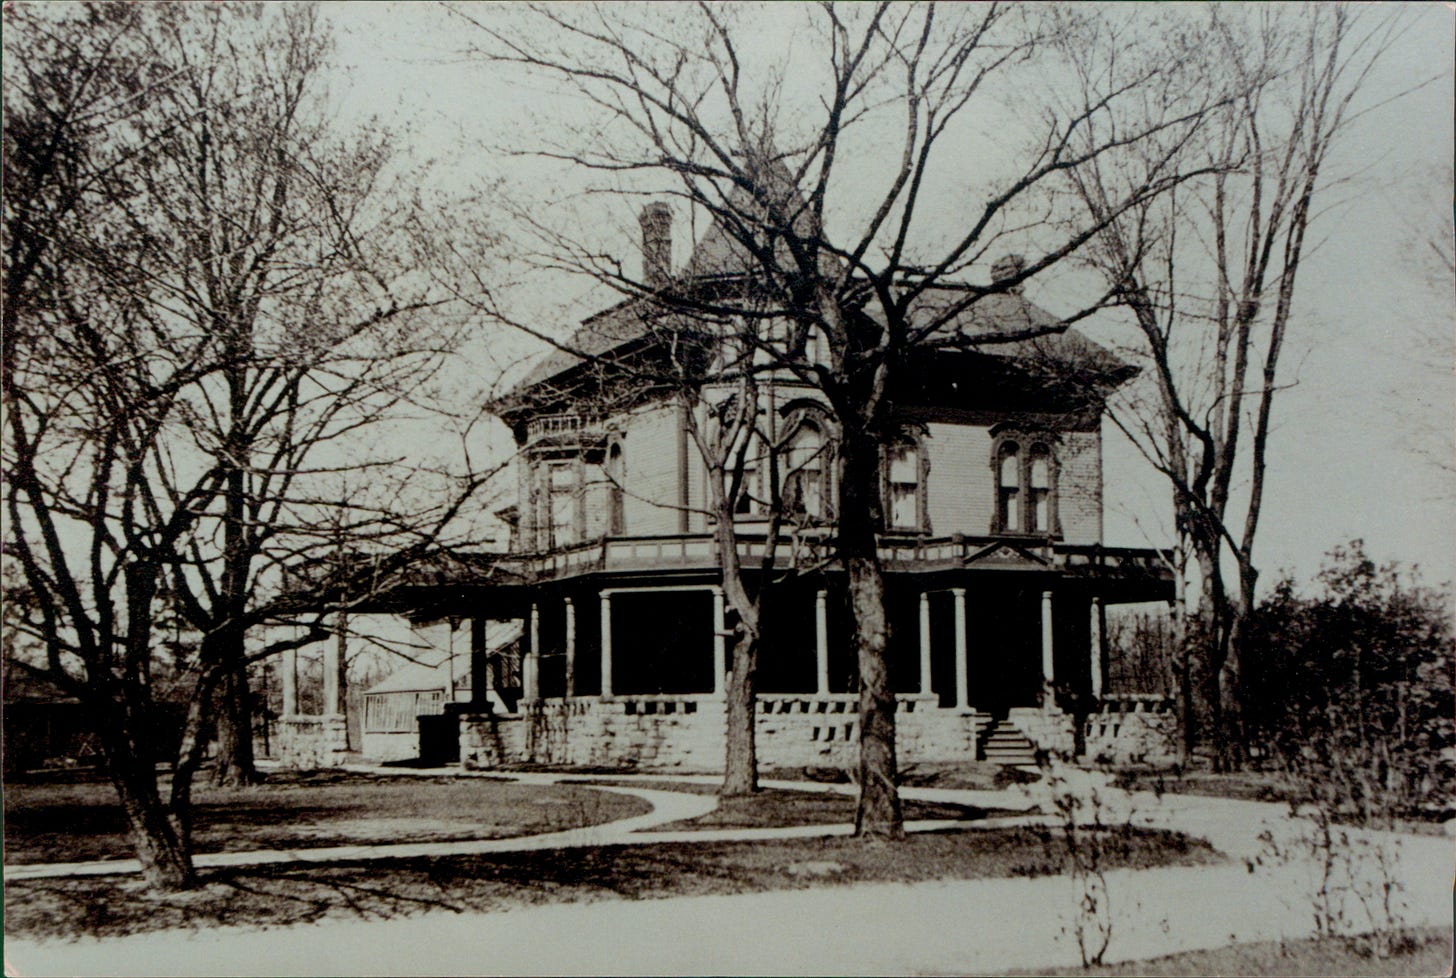 Black and white photo of Victorian house with wrap-around porch and steeply pitched hip roof with corner tower topped by a pointed roof.